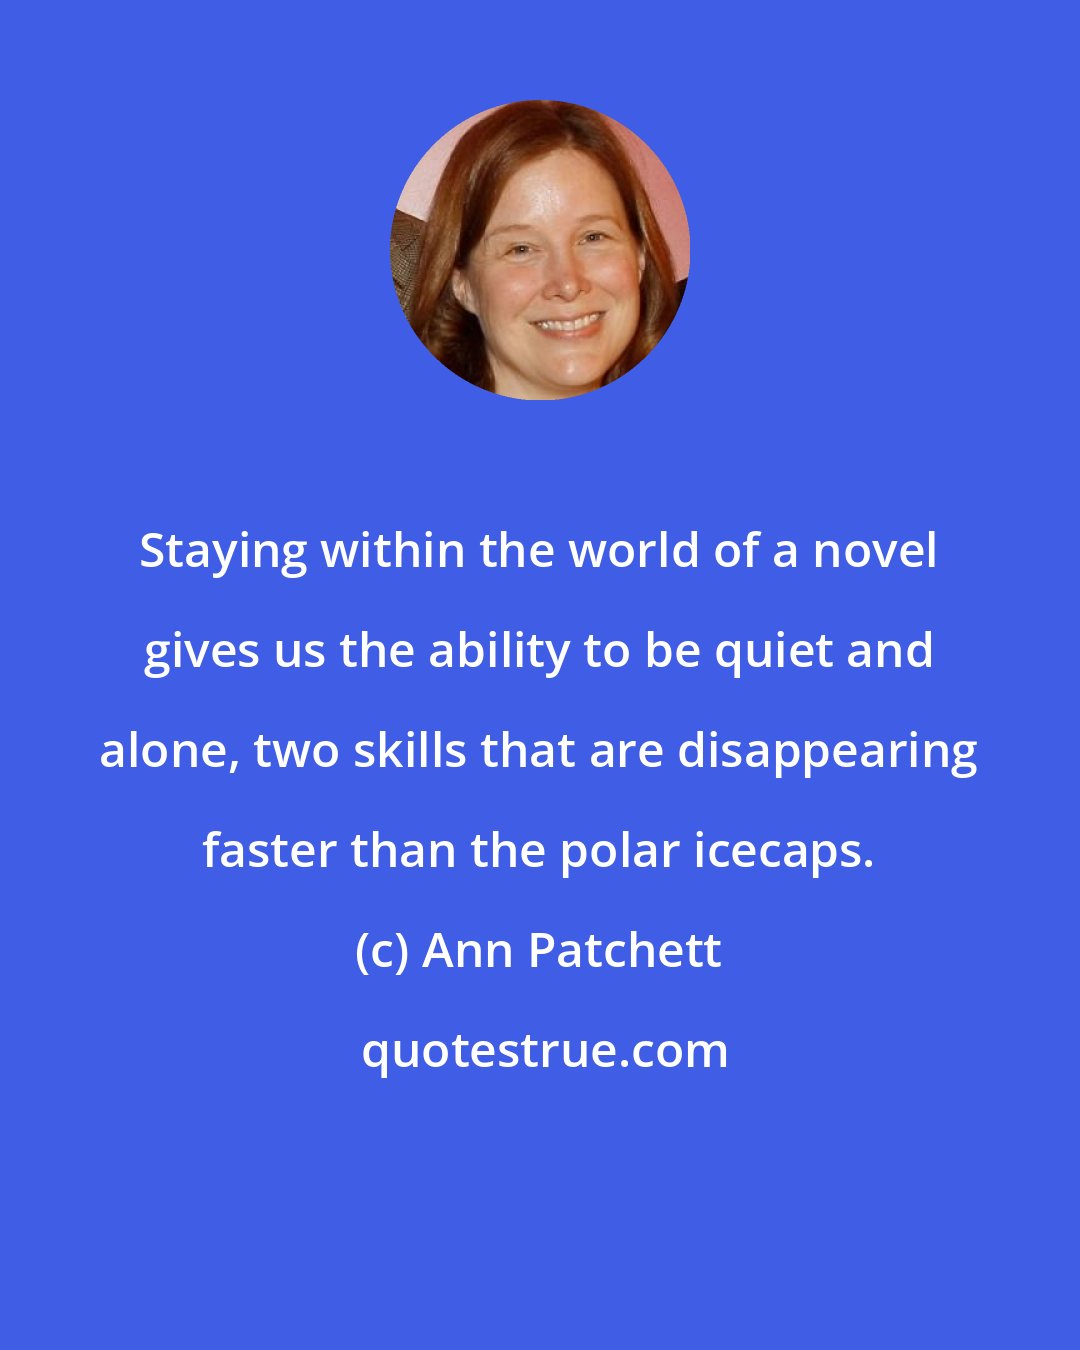 Ann Patchett: Staying within the world of a novel gives us the ability to be quiet and alone, two skills that are disappearing faster than the polar icecaps.